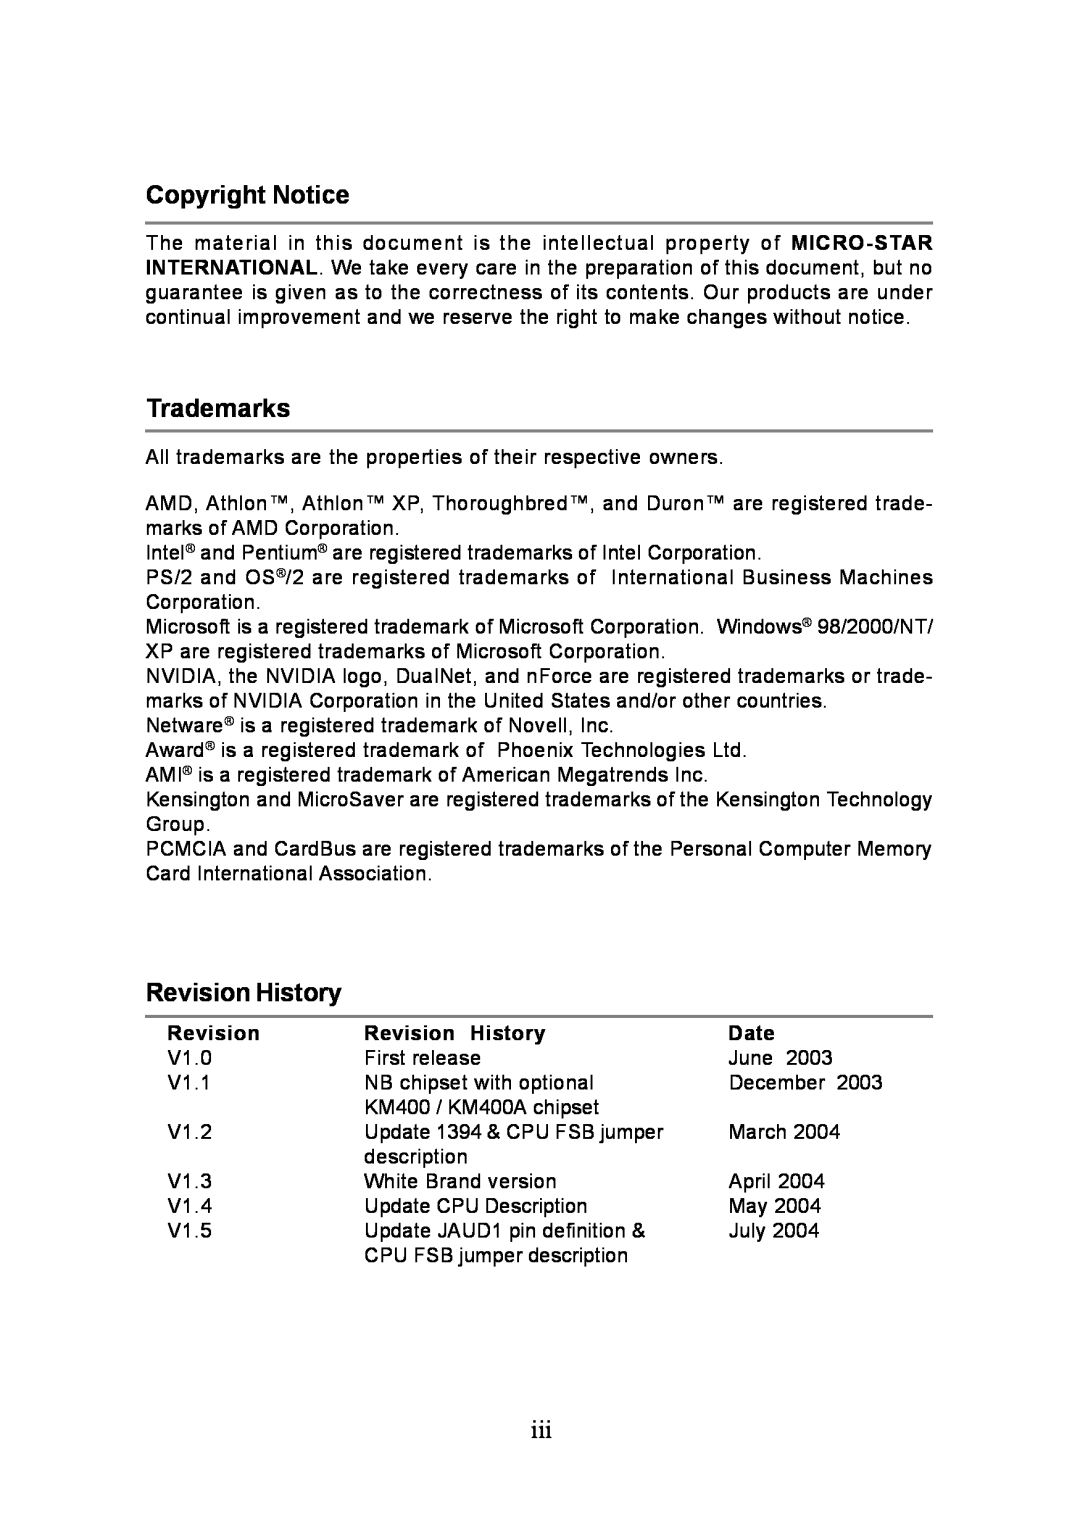 Intel G52-M6734XD, KM4M, KM4AM, MS-6734 manual Copyright Notice, Trademarks, Revision History, Date 